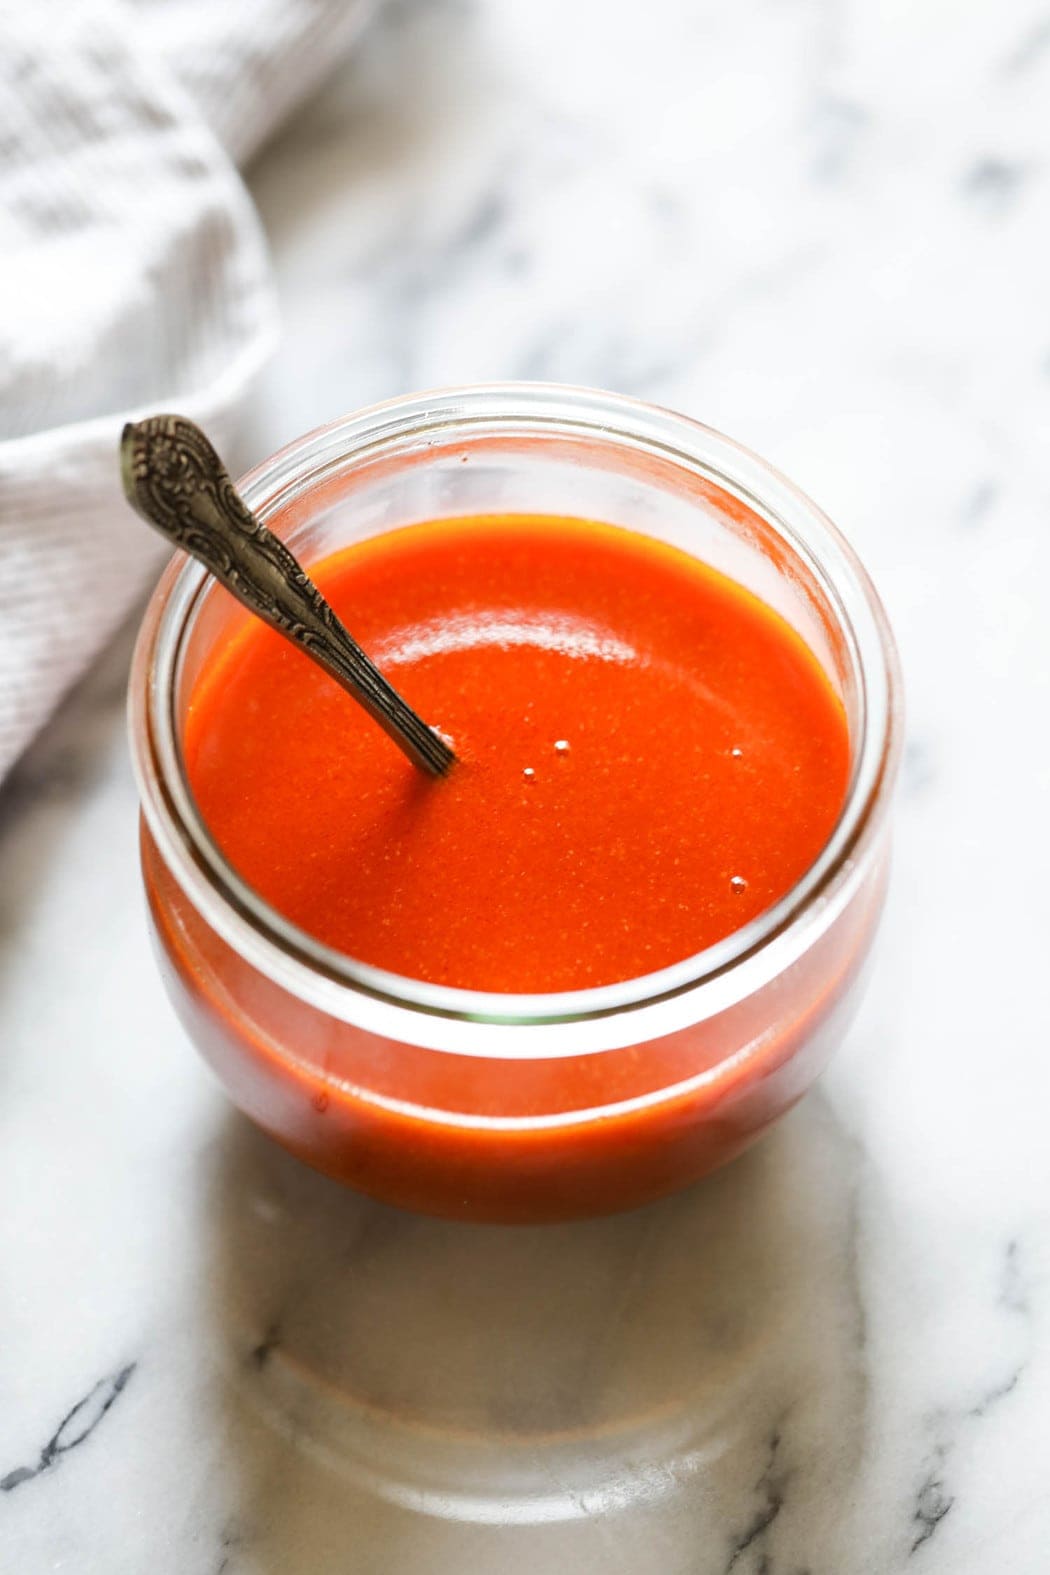 Uplifted udsultet Frugtbar Homemade Buffalo Sauce (Whole30) - The Real Food Dietitians